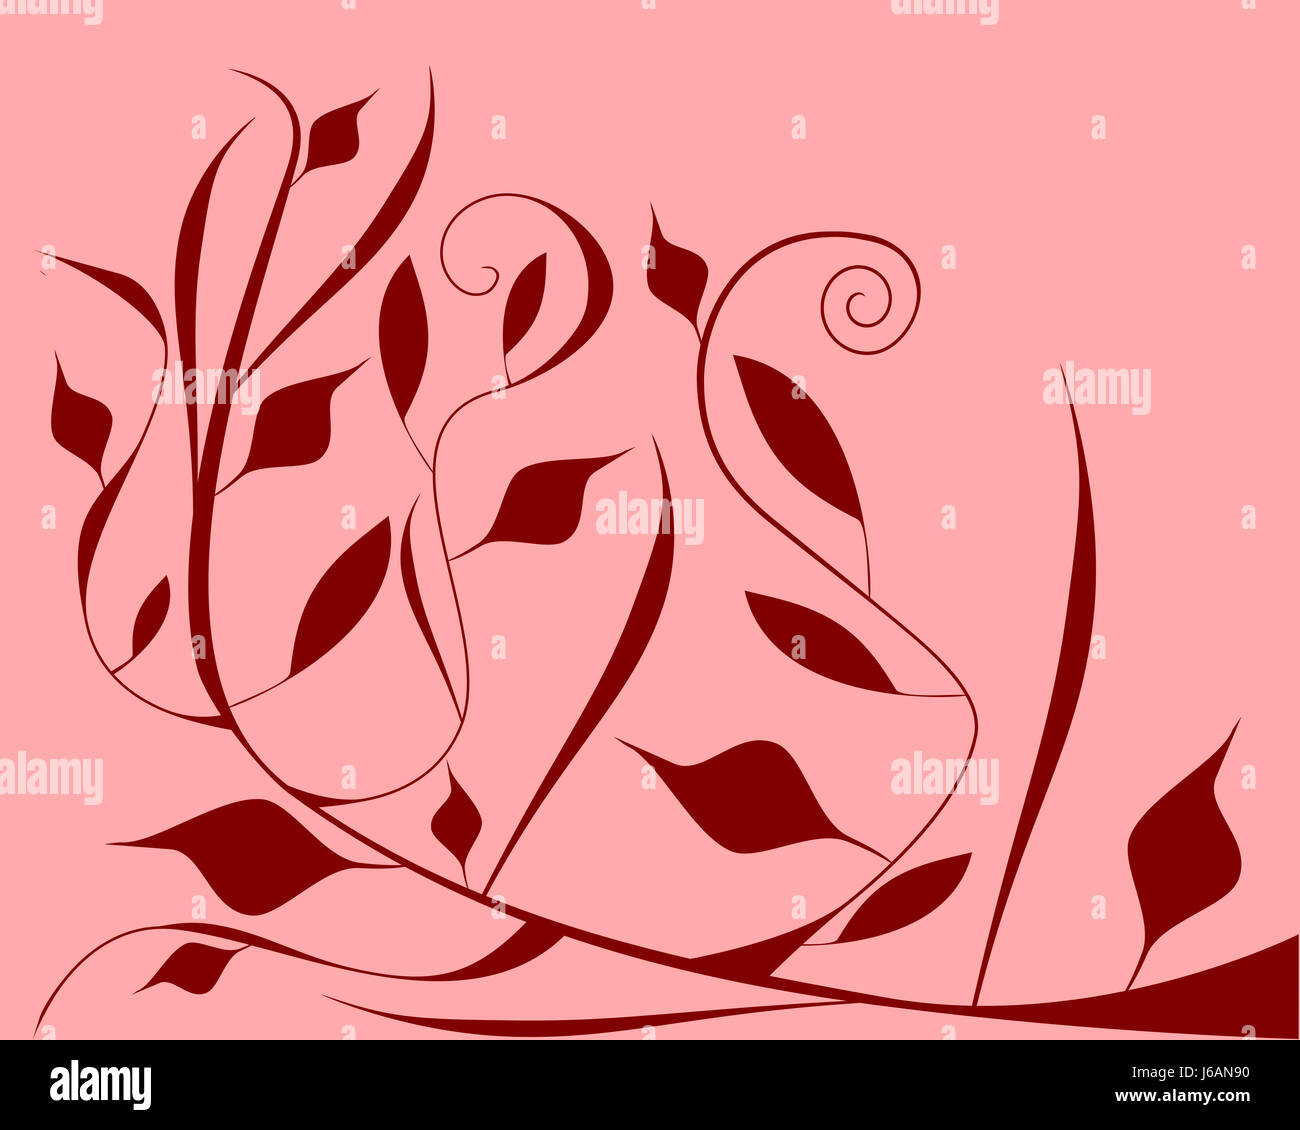 floral design on pink background Stock Photo